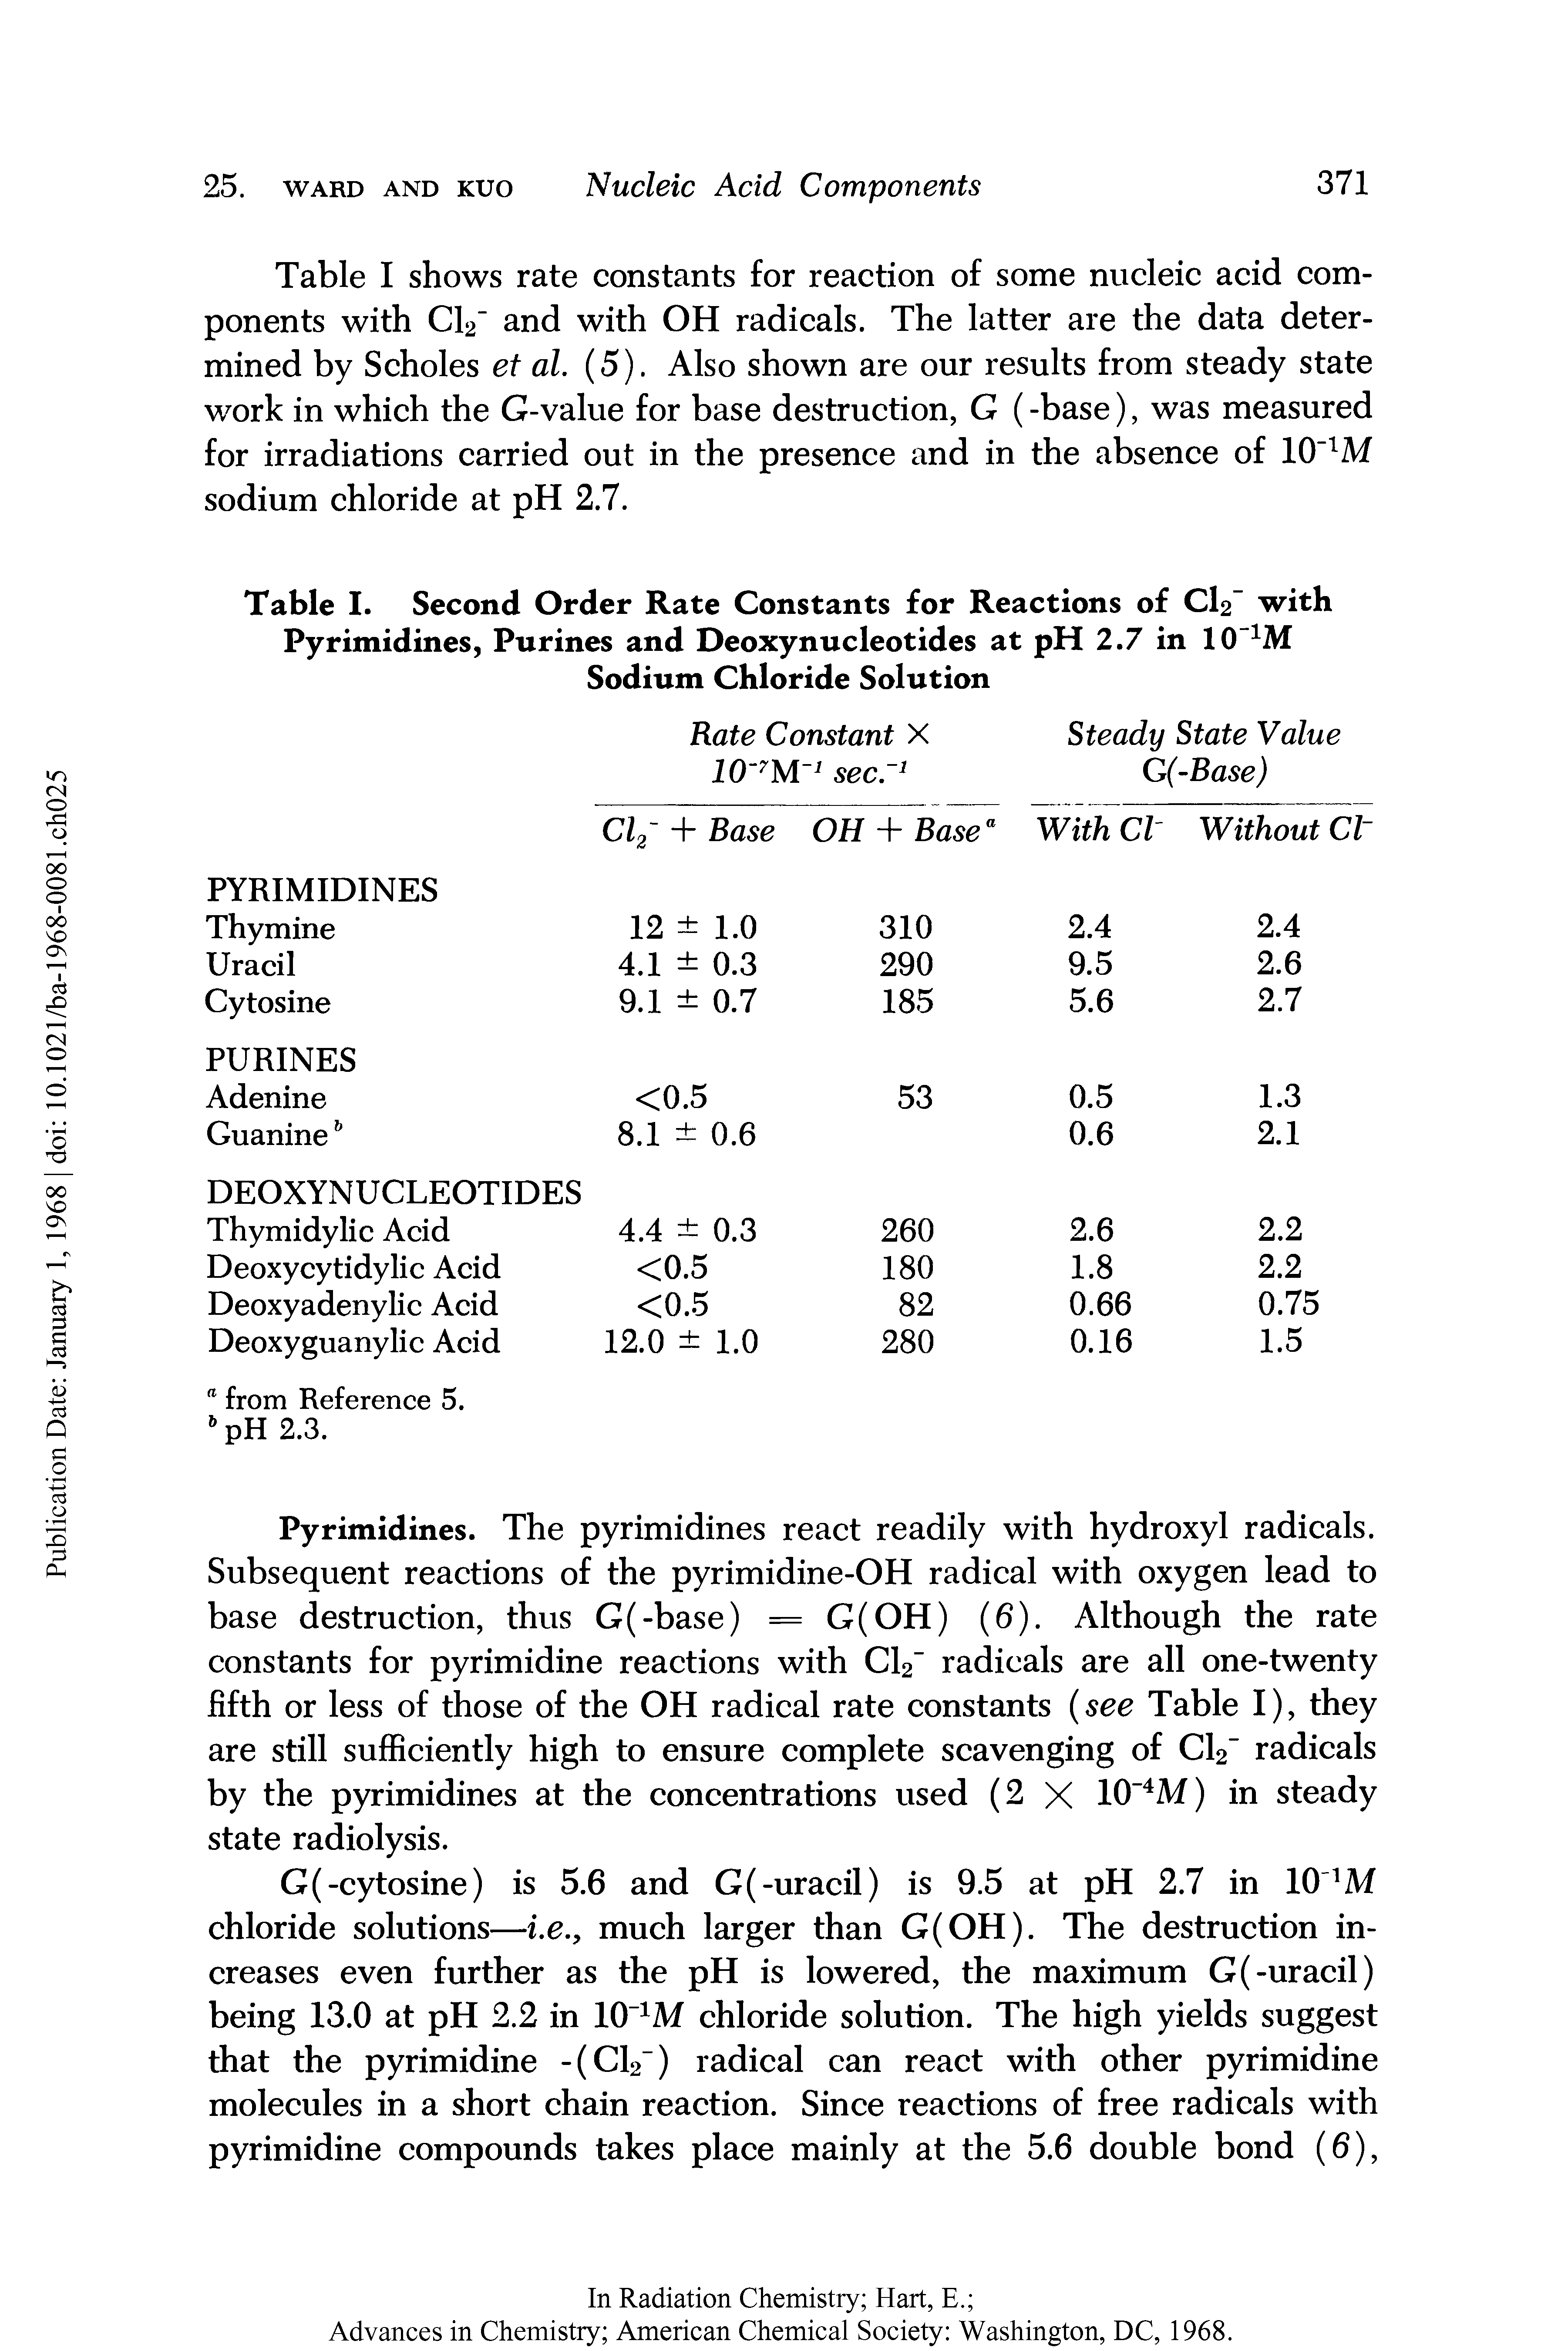 Table I shows rate constants for reaction of some nucleic acid components with Cl2 and with OH radicals. The latter are the data determined by Scholes et al. (5). Also shown are our results from steady state work in which the G-value for base destruction, G (-base), was measured for irradiations carried out in the presence and in the absence of 10 lM sodium chloride at pH 2.7.